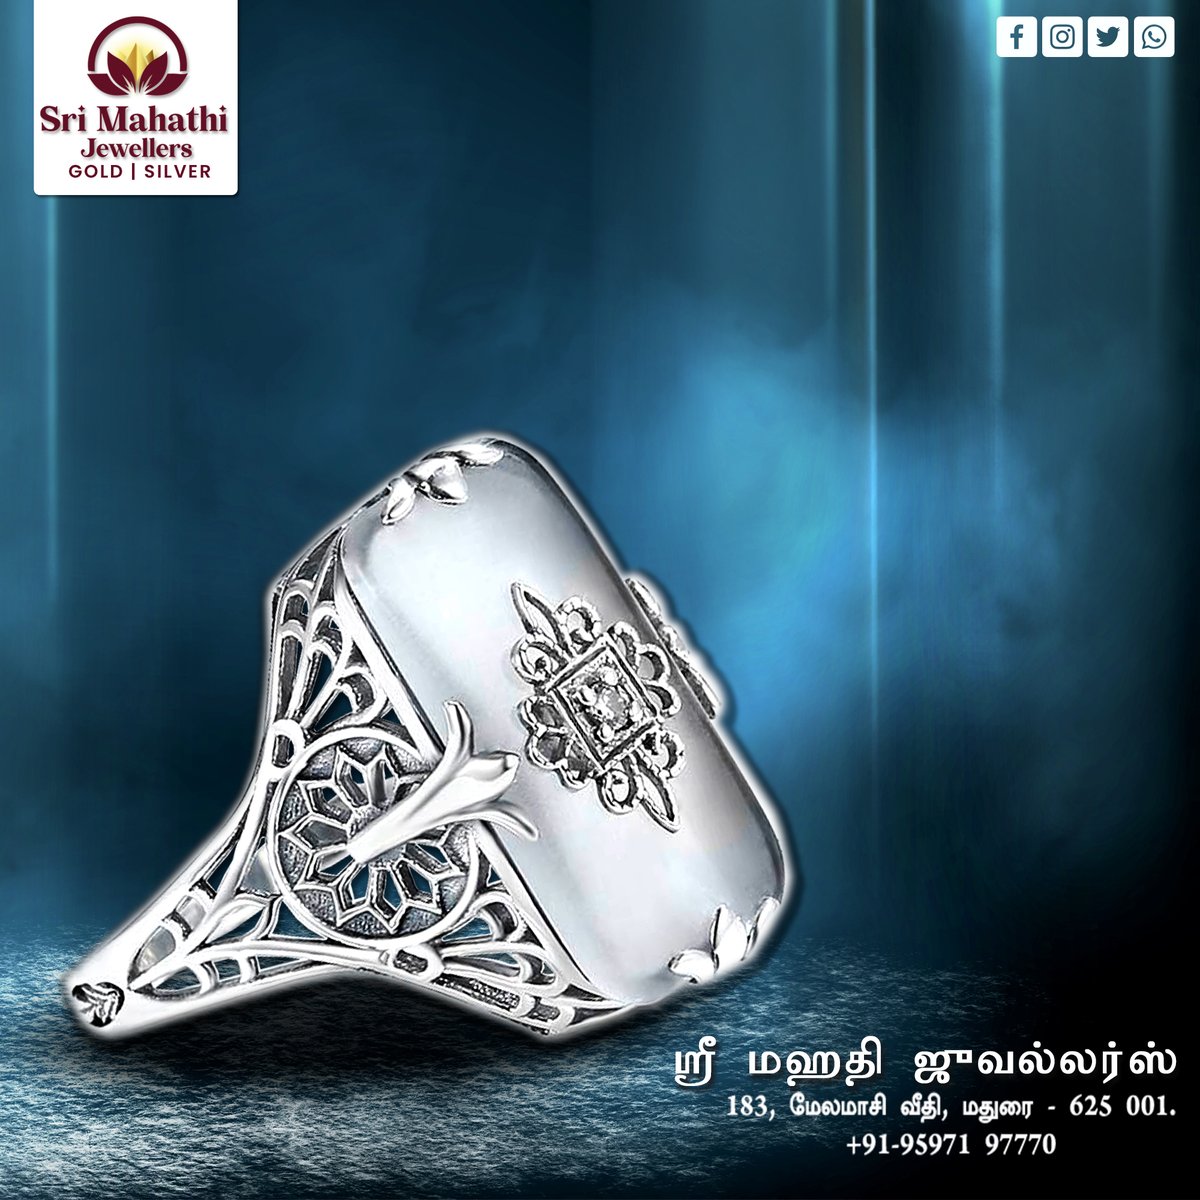 Sterling Silver 925 Camphor Crystal Ring For Women With Stone Vintage Design from the house of Sri Mahathi Jewellers

#silvervintagedesign #silvervintagering #silverringsforwomen #silvercrystalrings #latestsilverringcollections #SriMahathiJewellers #SriMahathiJewellersMadurai